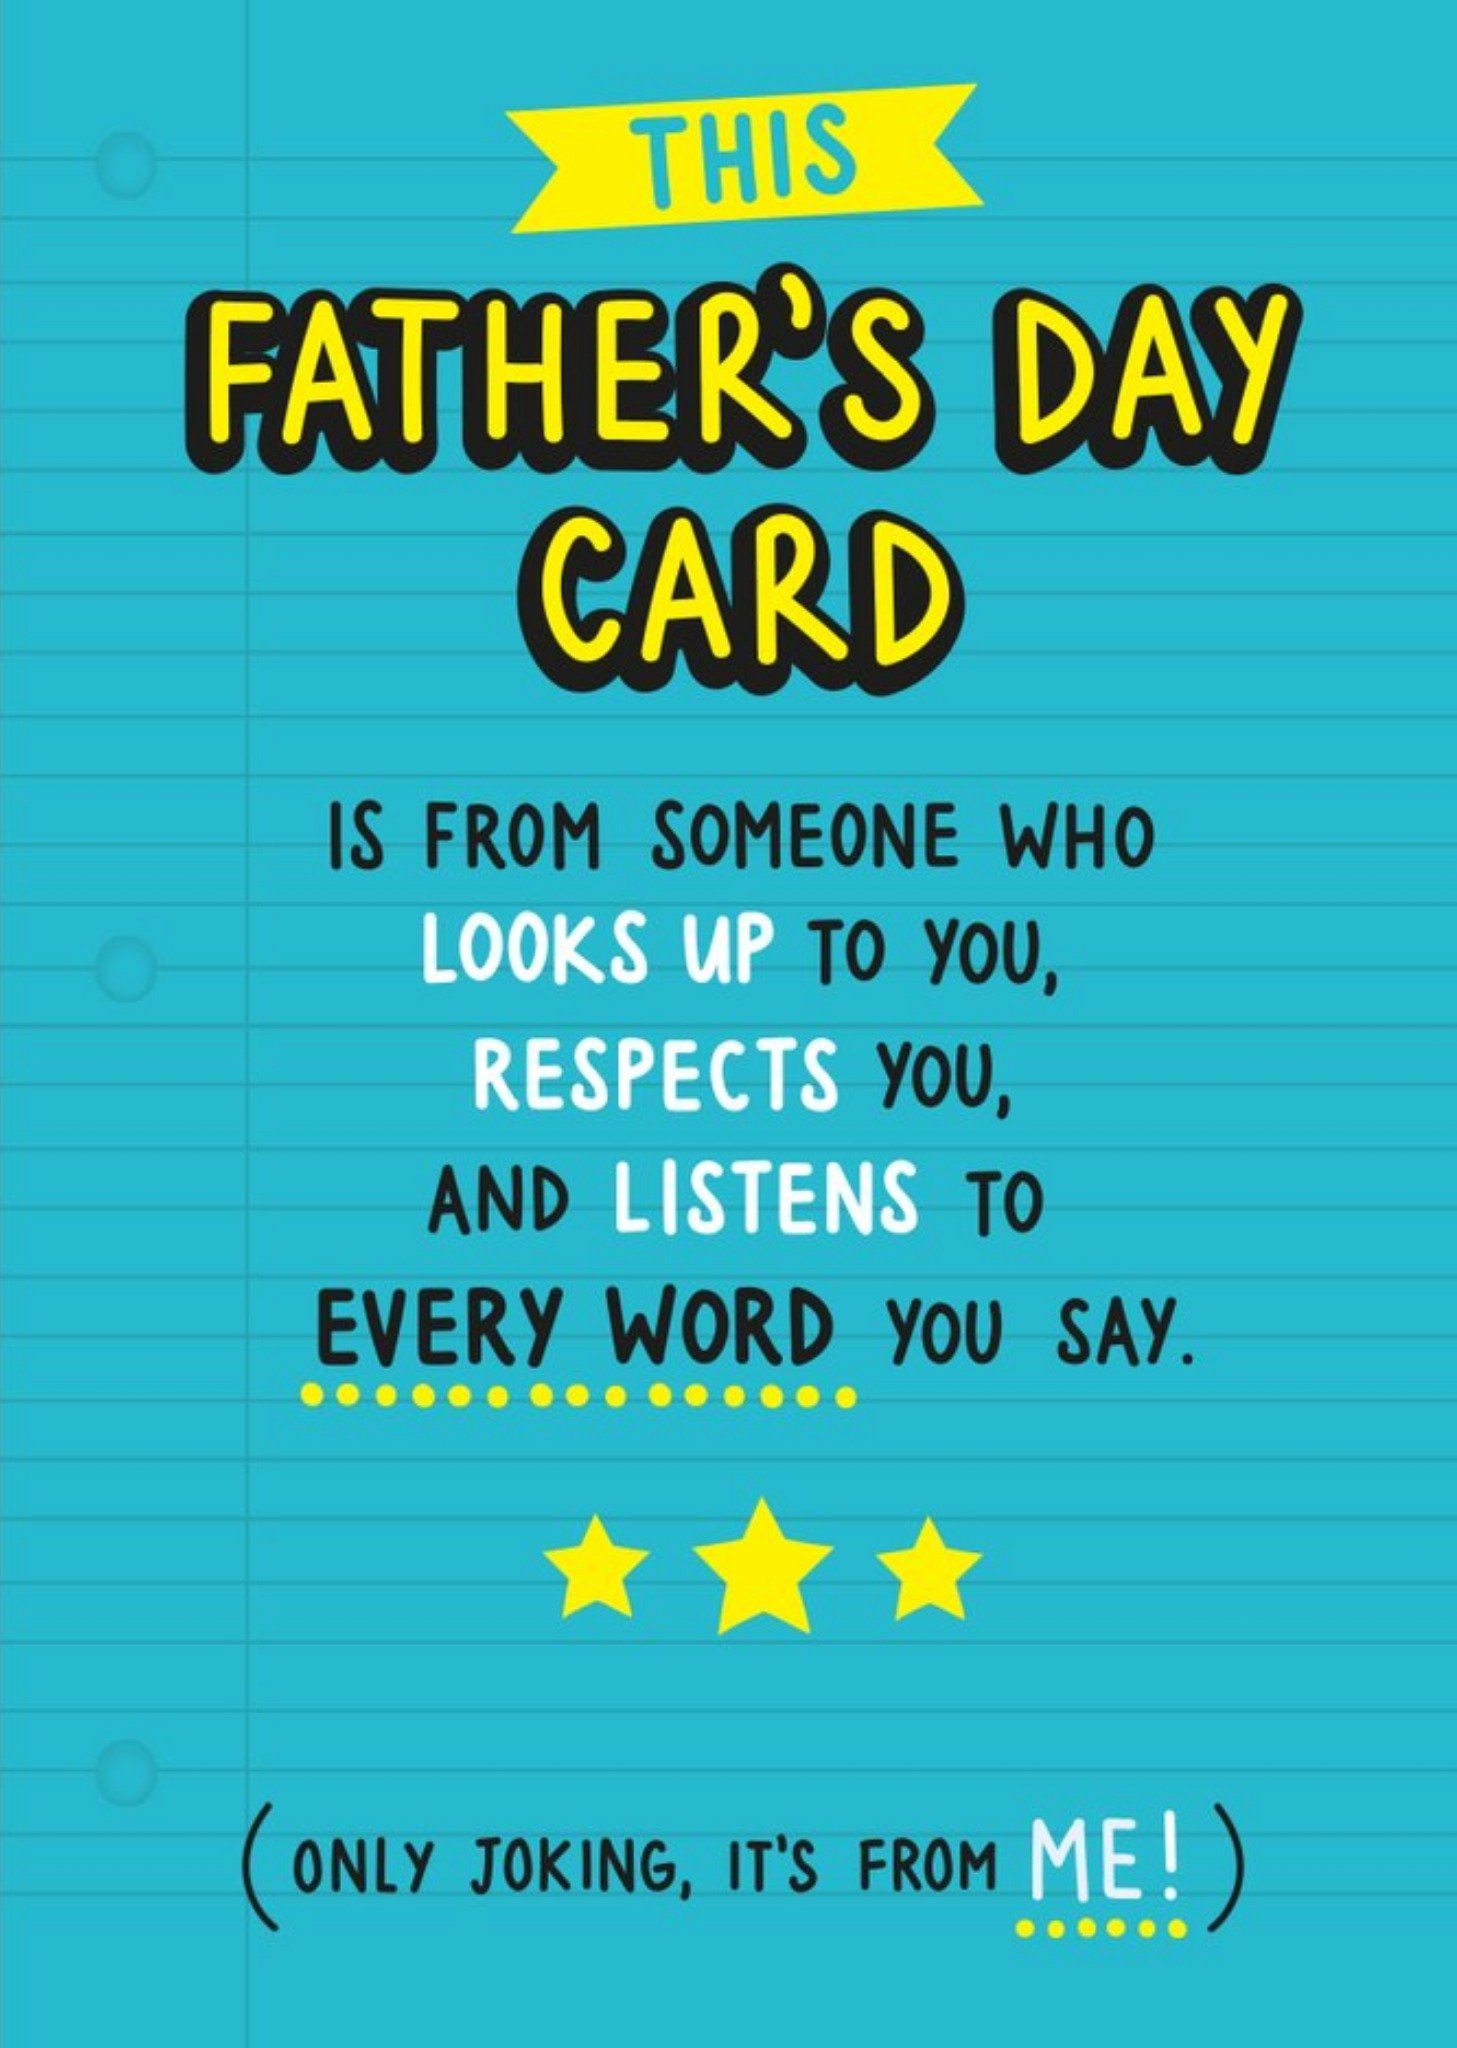 Moonpig Funny This Fathers Day Card Ecard